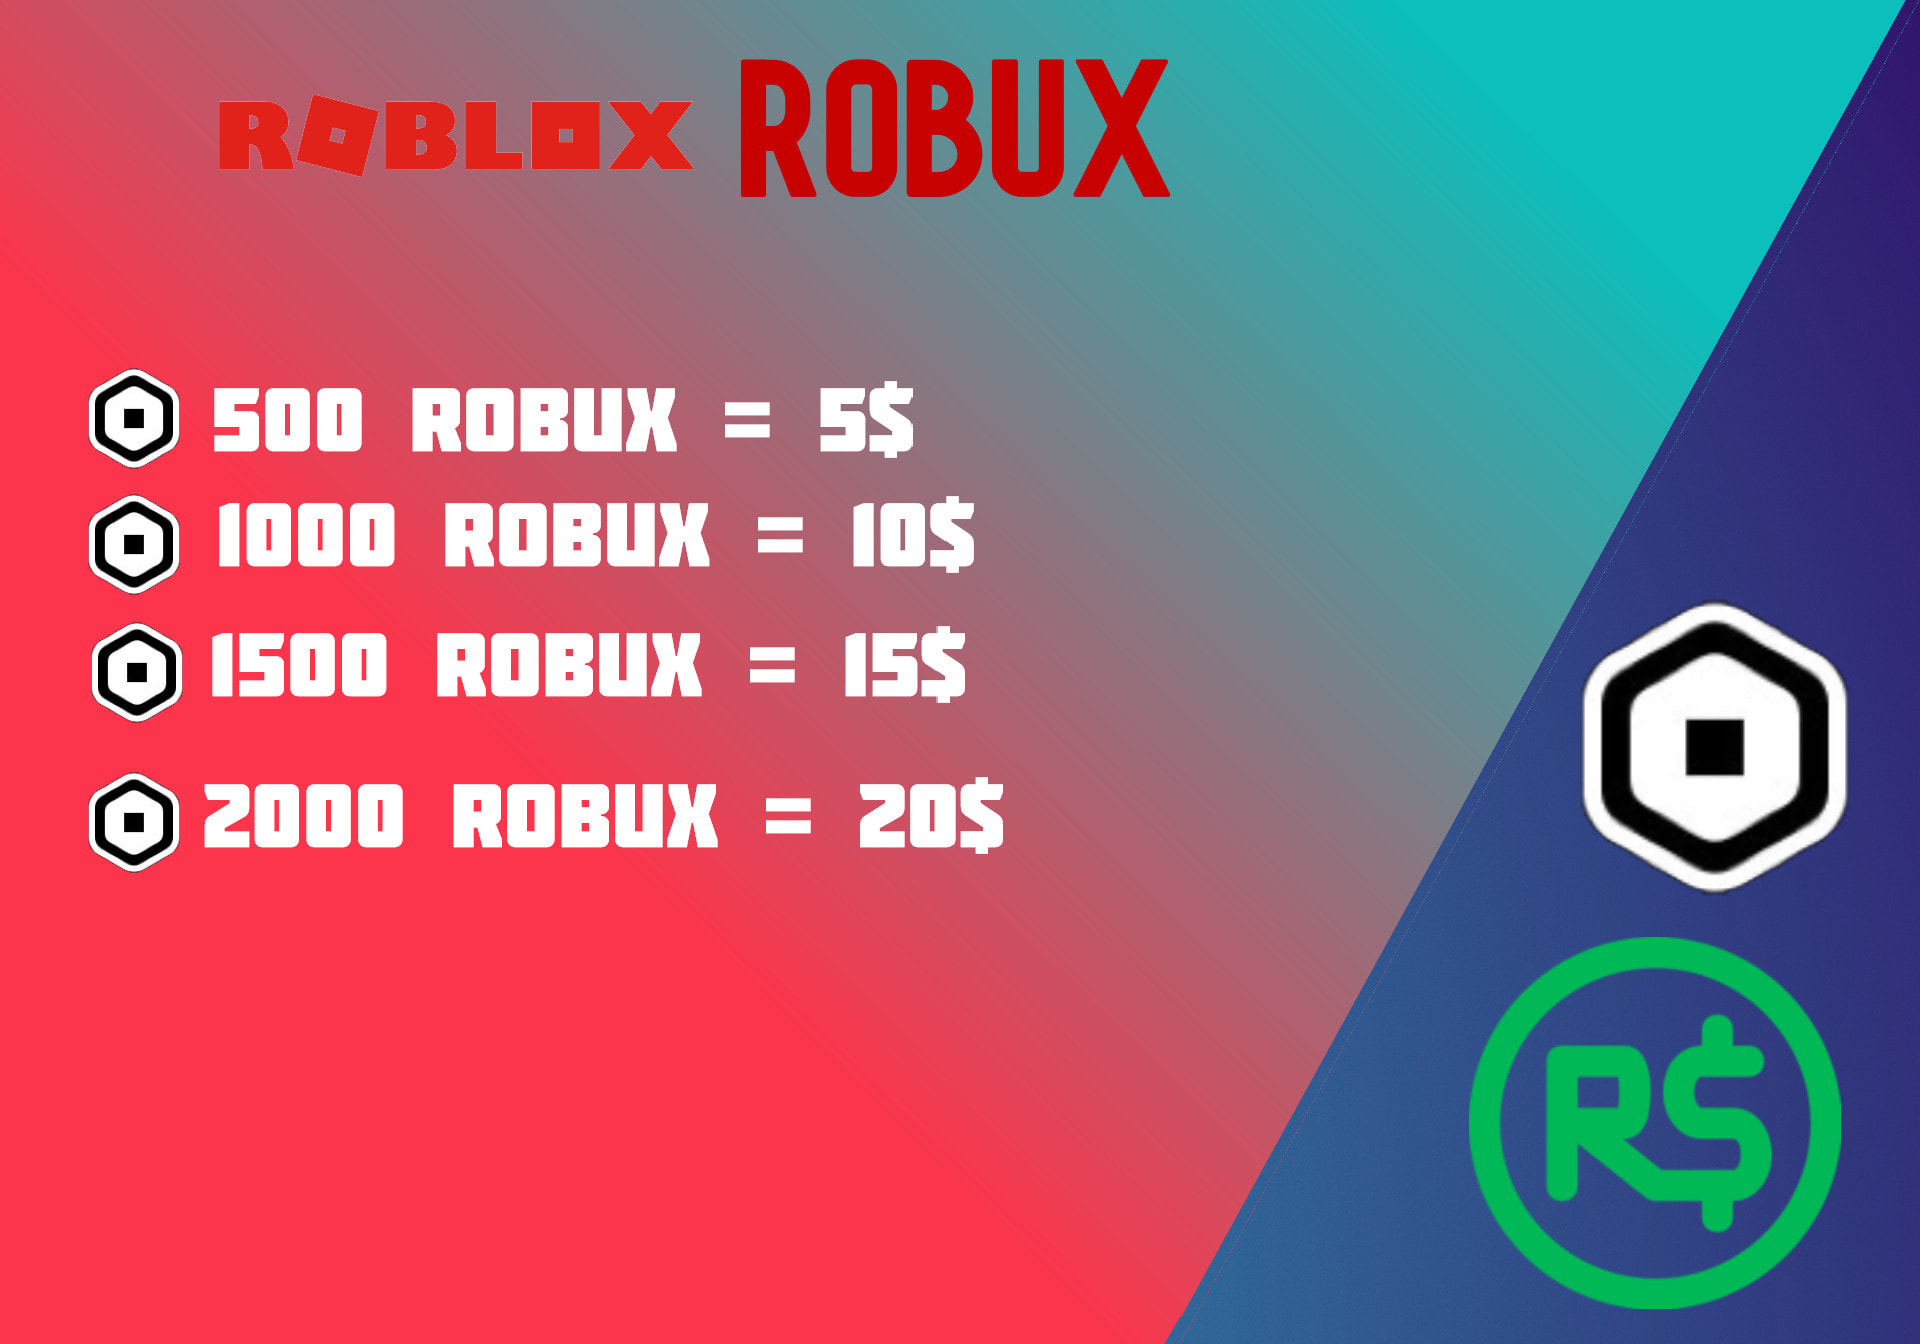 Sell Robux For Who Needs Robux Come Buy This By Dragontecz Fiverr - can i sell robux